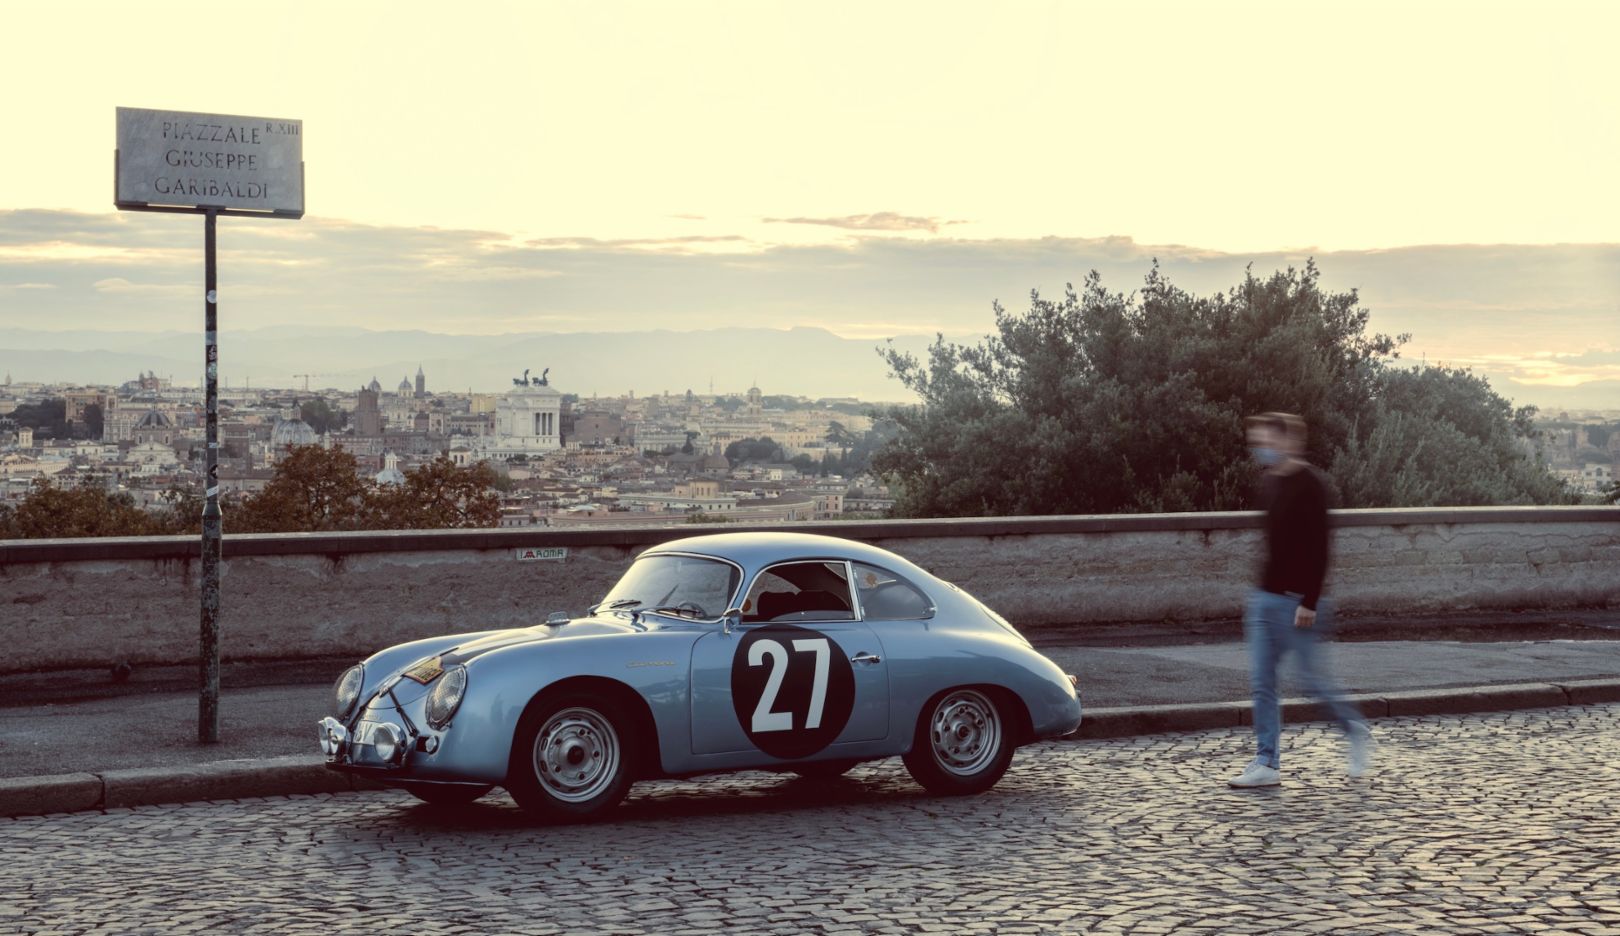 In 1959, Paul Ernst Strähle and Robert Buchet won the Liège-Rome-Liège rally in the Porsche 356 A 1600 GS Carrera GT—without actually being allowed to enter the Italian capital. Sixty-two years later, Marc Lieb brings the V2 to the Eternal City. 